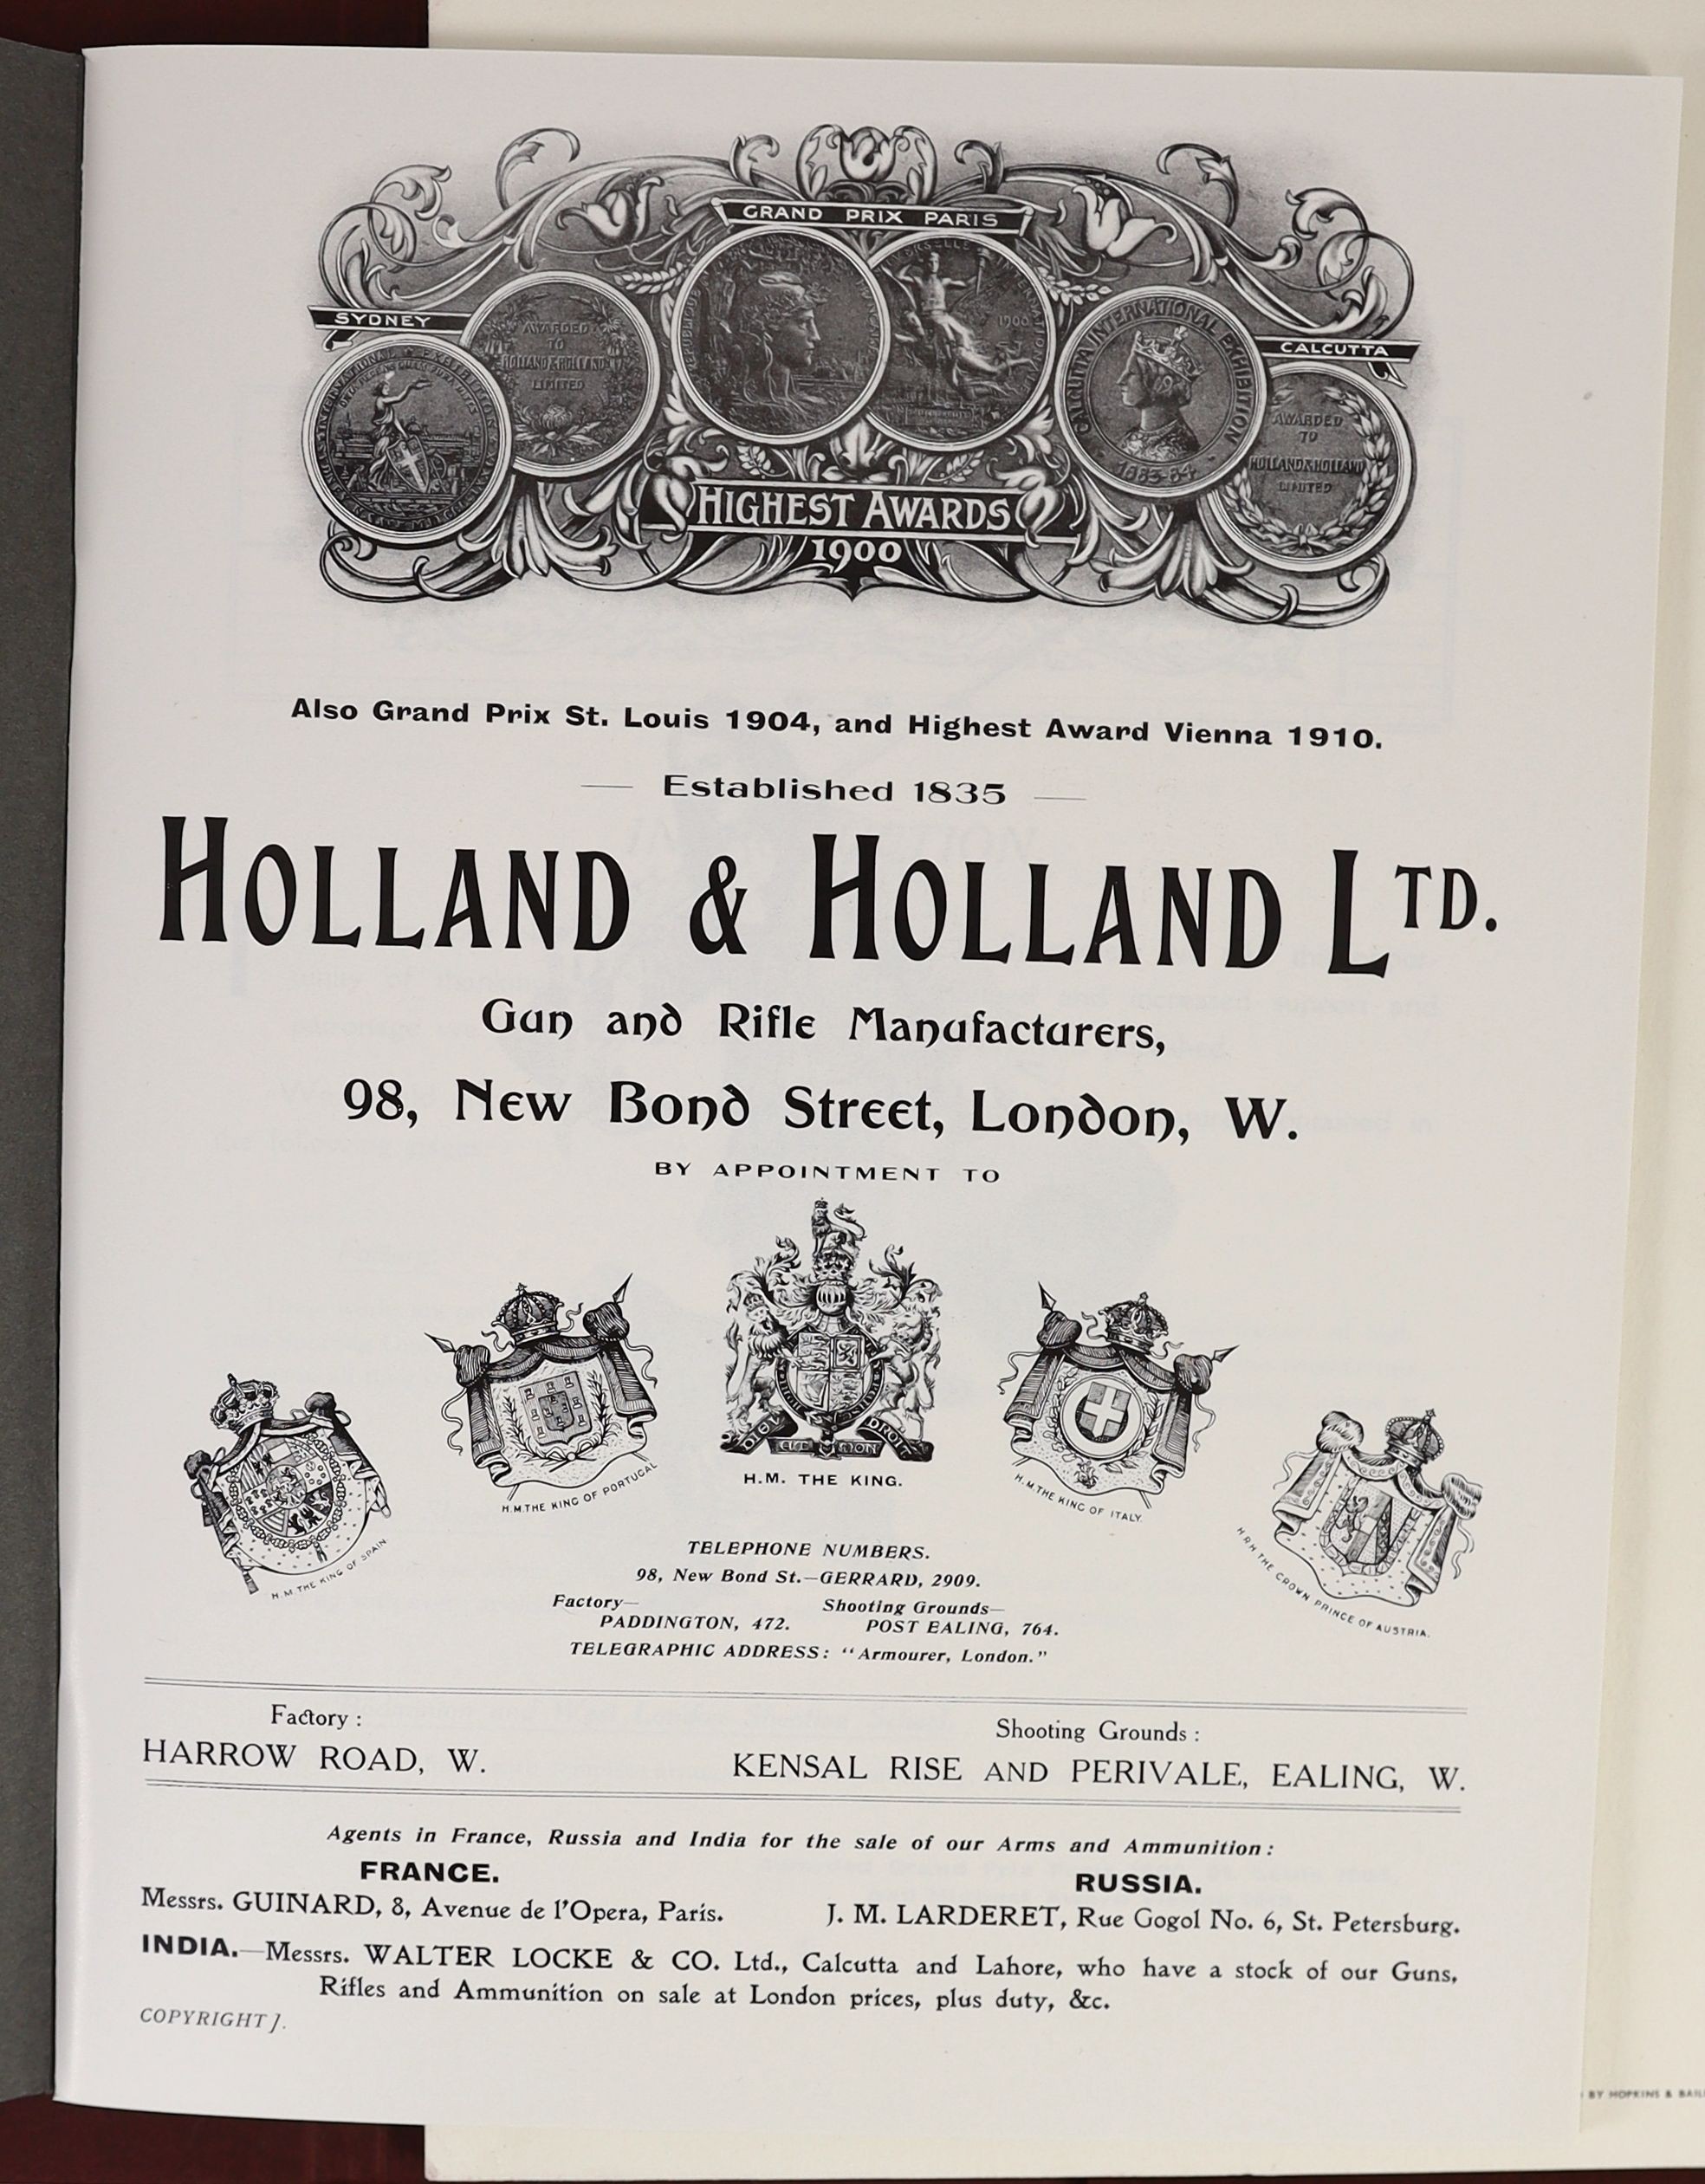 [Keates, Carey. ]The Holland & Holland Collection with a Brief History of the Company and Notes on Related Subjects 1976. Privately printed by Holland & Holland, London, 1976. Bound in full red morocco with inner dentell